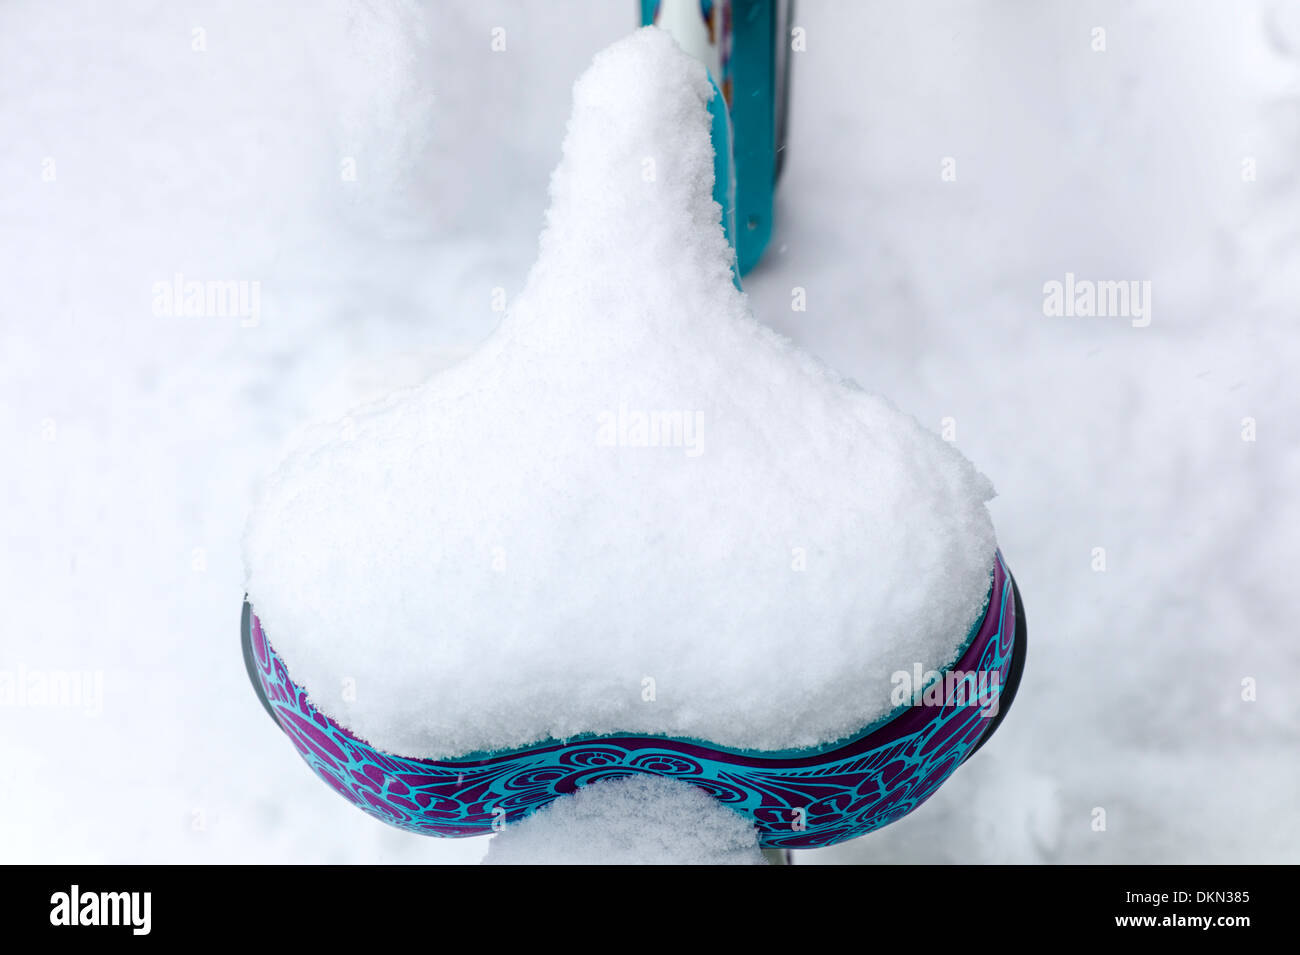 Snowy winter view of bicycle outside a shop in historic downtown Salida, Colorado, USA Stock Photo